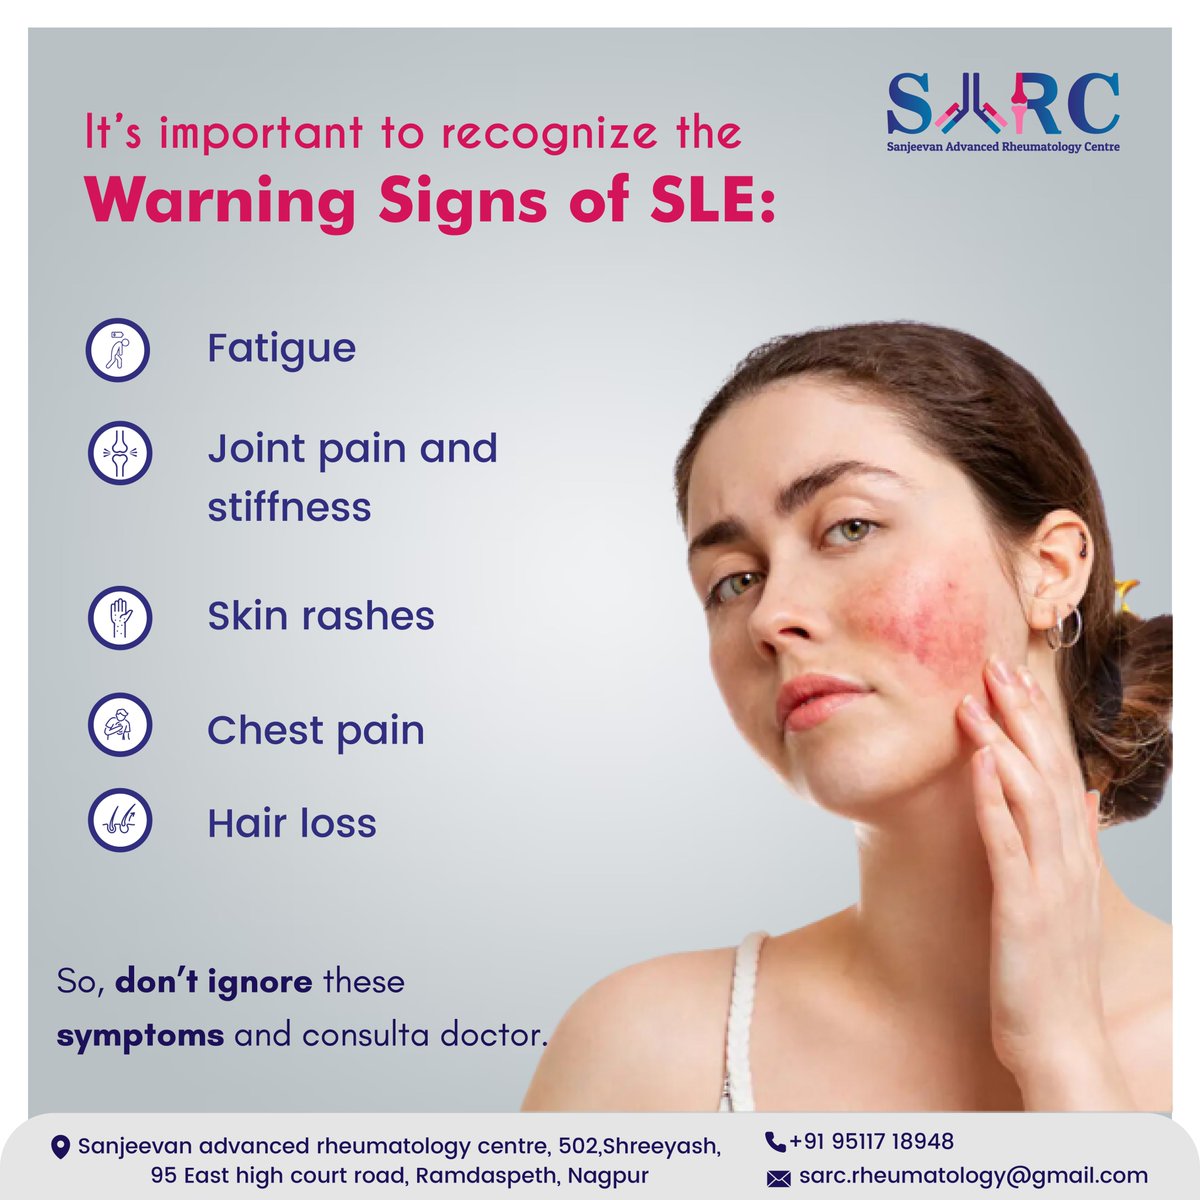 Its important to recognize the warning signs of SLE:

#LupusAwareness #KnowTheSigns #AutoimmuneDisease #ChronicIllness #EarlyDetection #LupusSymptoms #LupusFlare #ButYouDontLookSick #LupusWarrior #InvisibleIllness